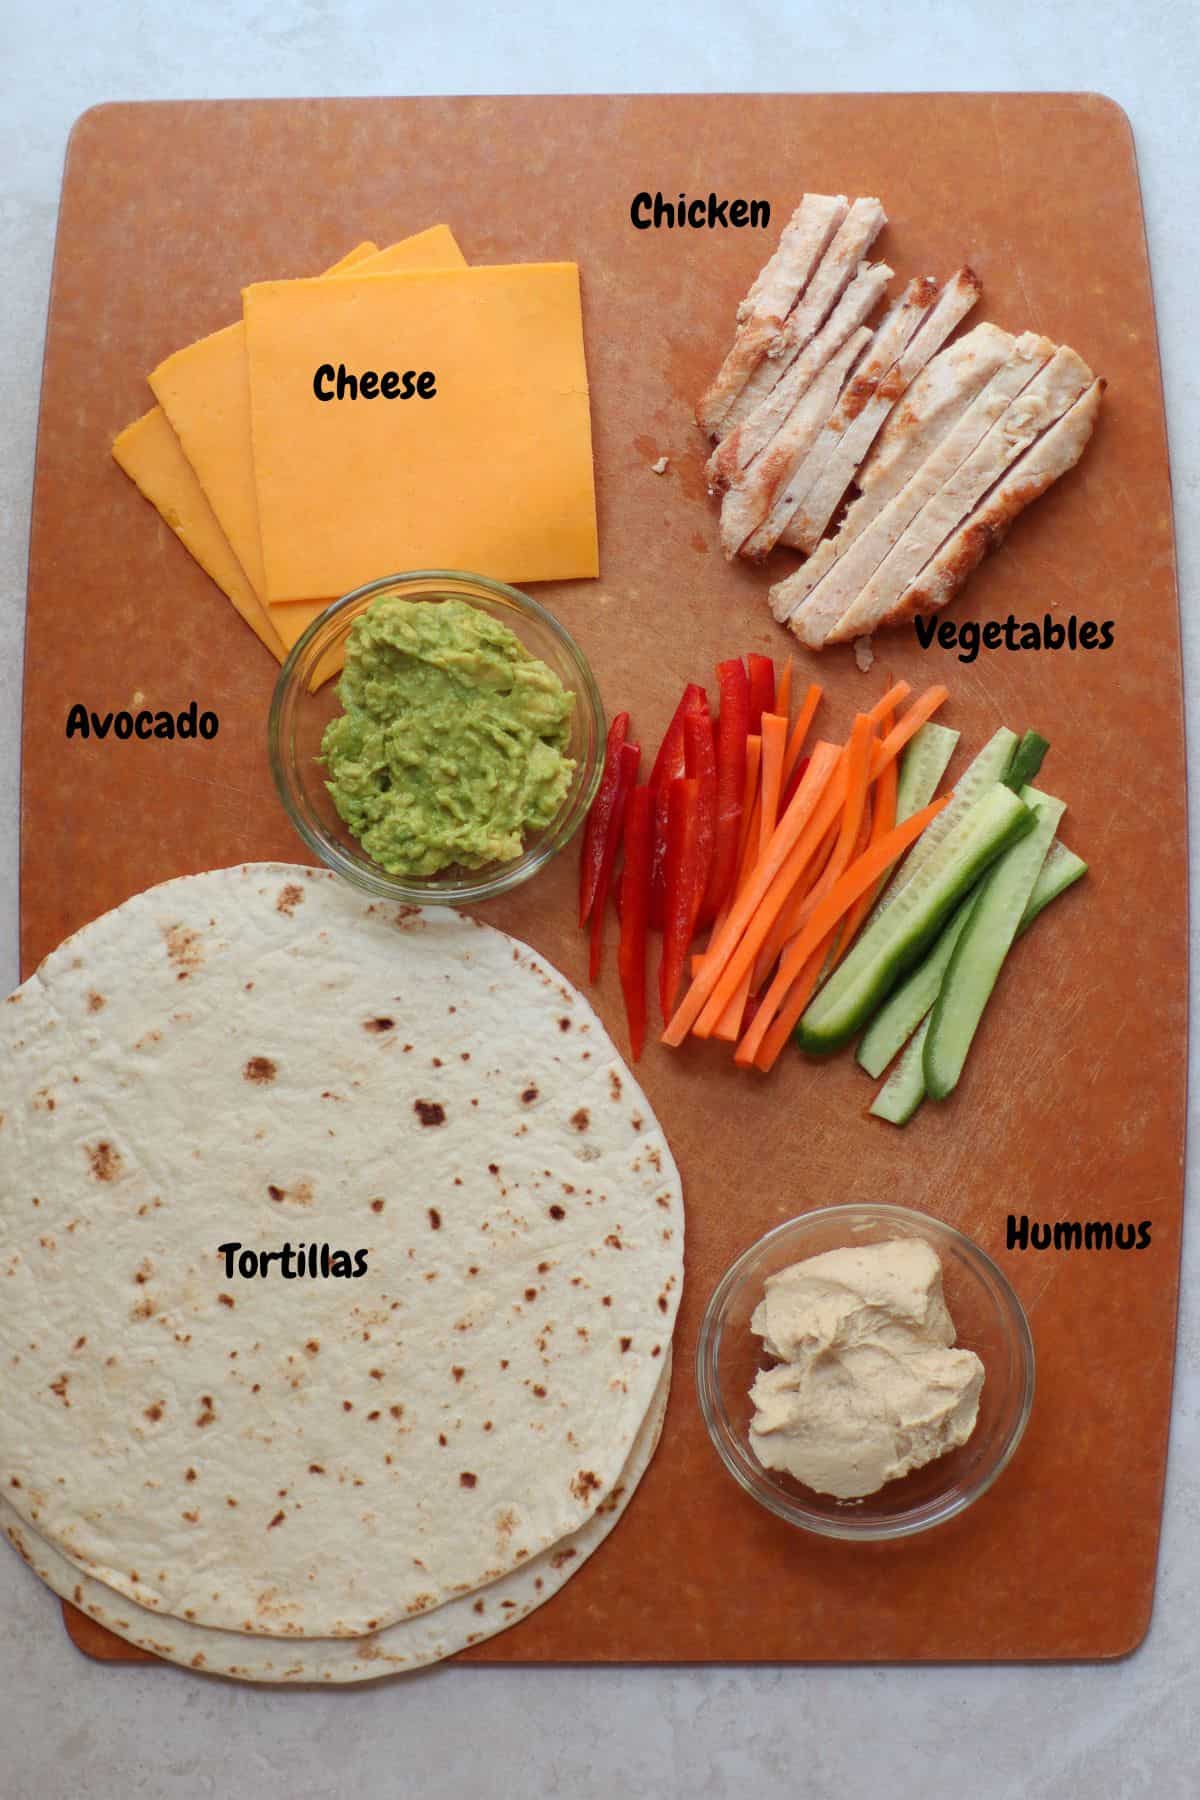 All the ingredients laid out on a wooden board.